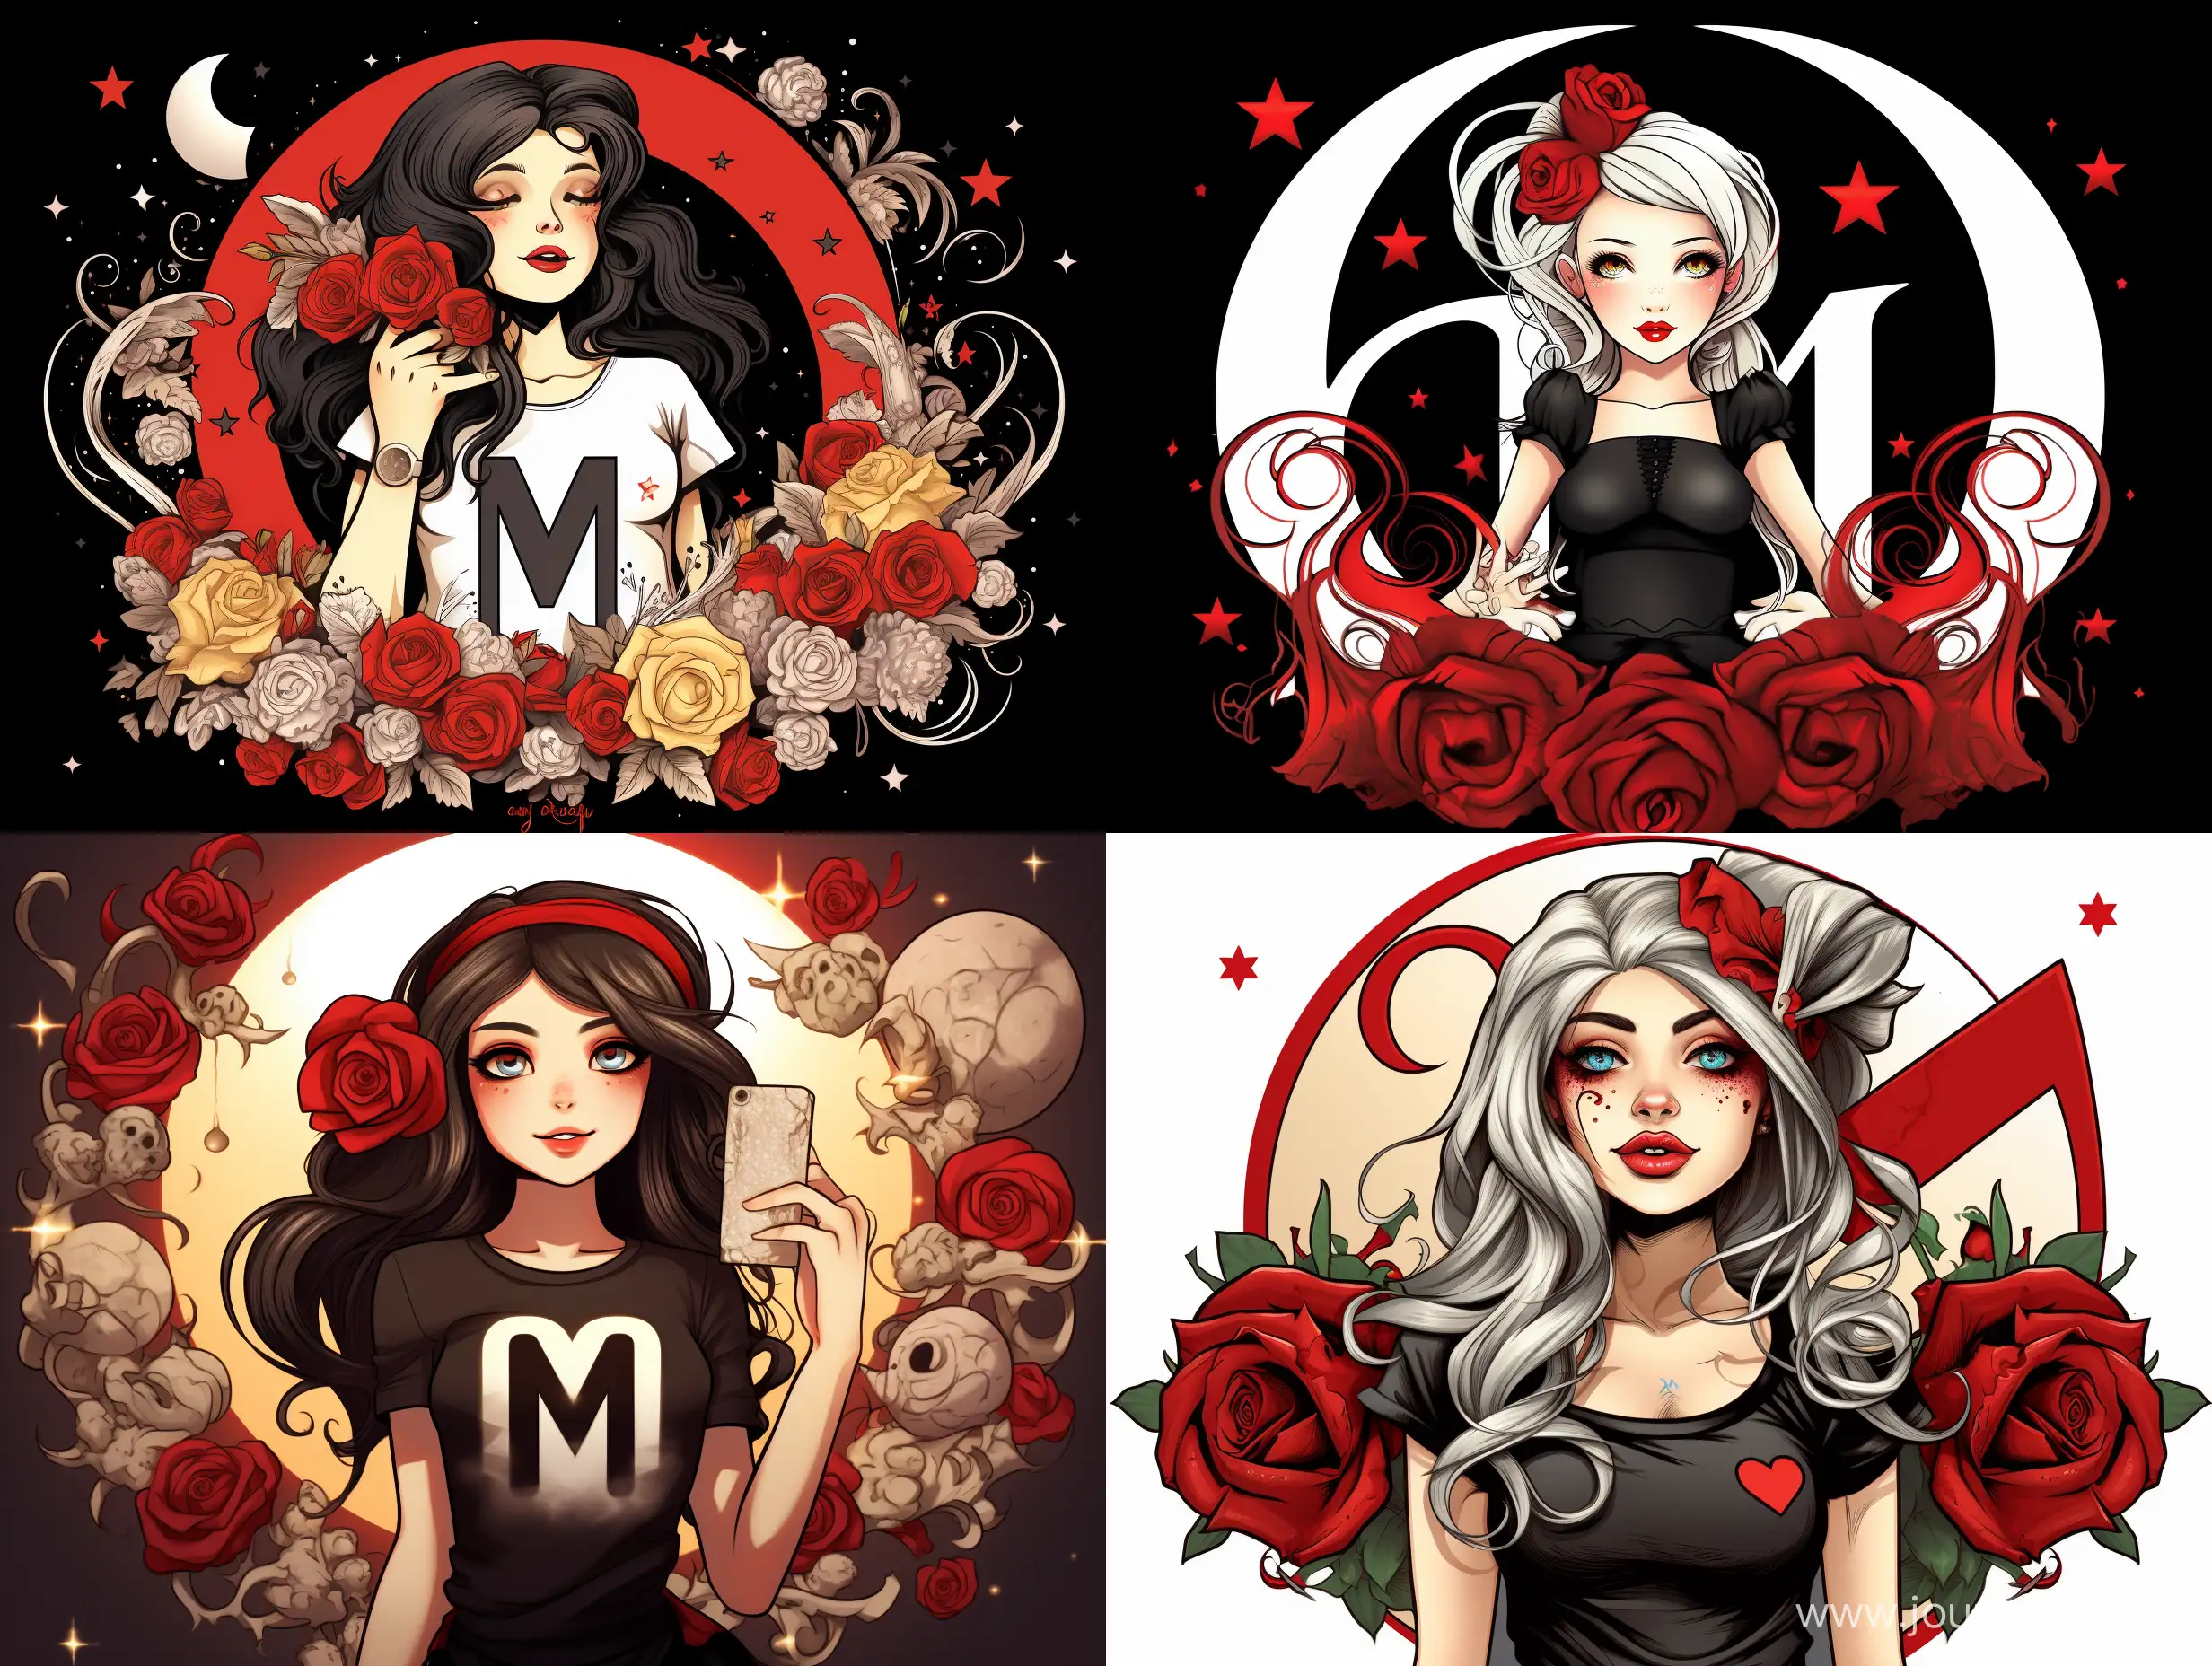 A cartoon girl wearing a black and white T-shirt with the letter M written on it, and behind her is the sun, planets, stars, wings, and red and white roses.